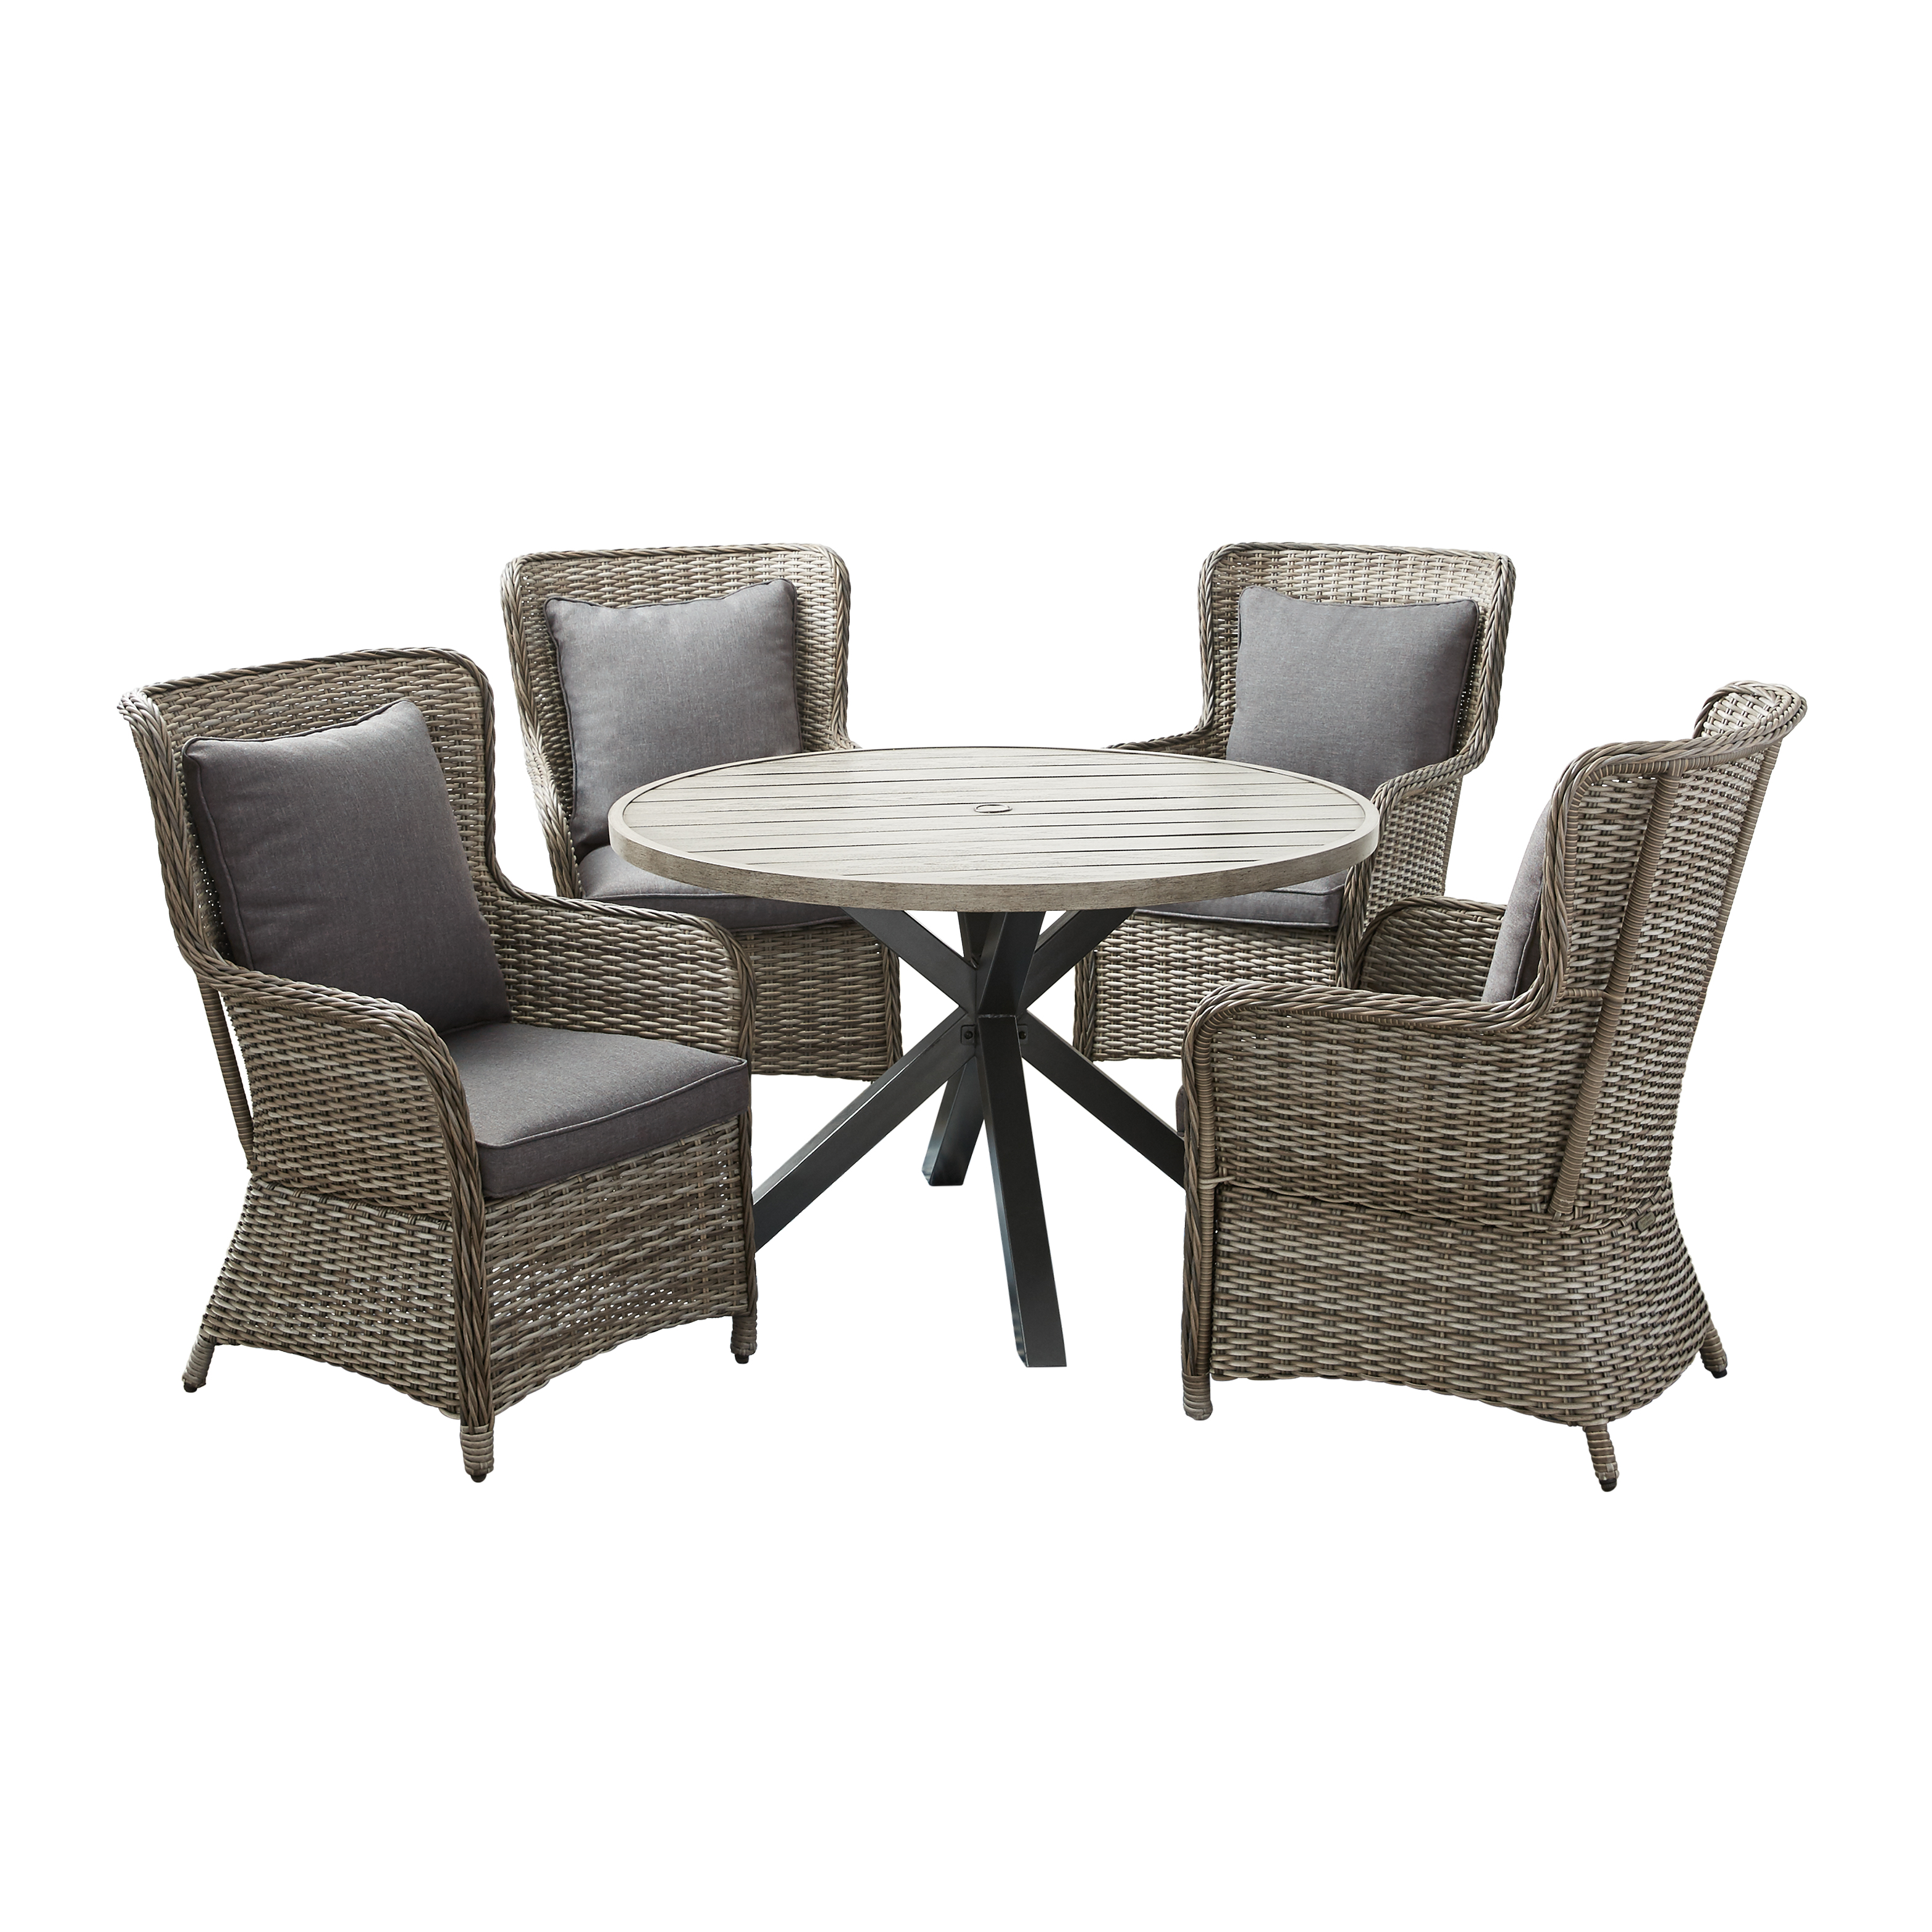 Better Homes and Gardens Victoria Outdoor Dining Patio Set, Cushioned Wicker 5 Piece - image 1 of 5